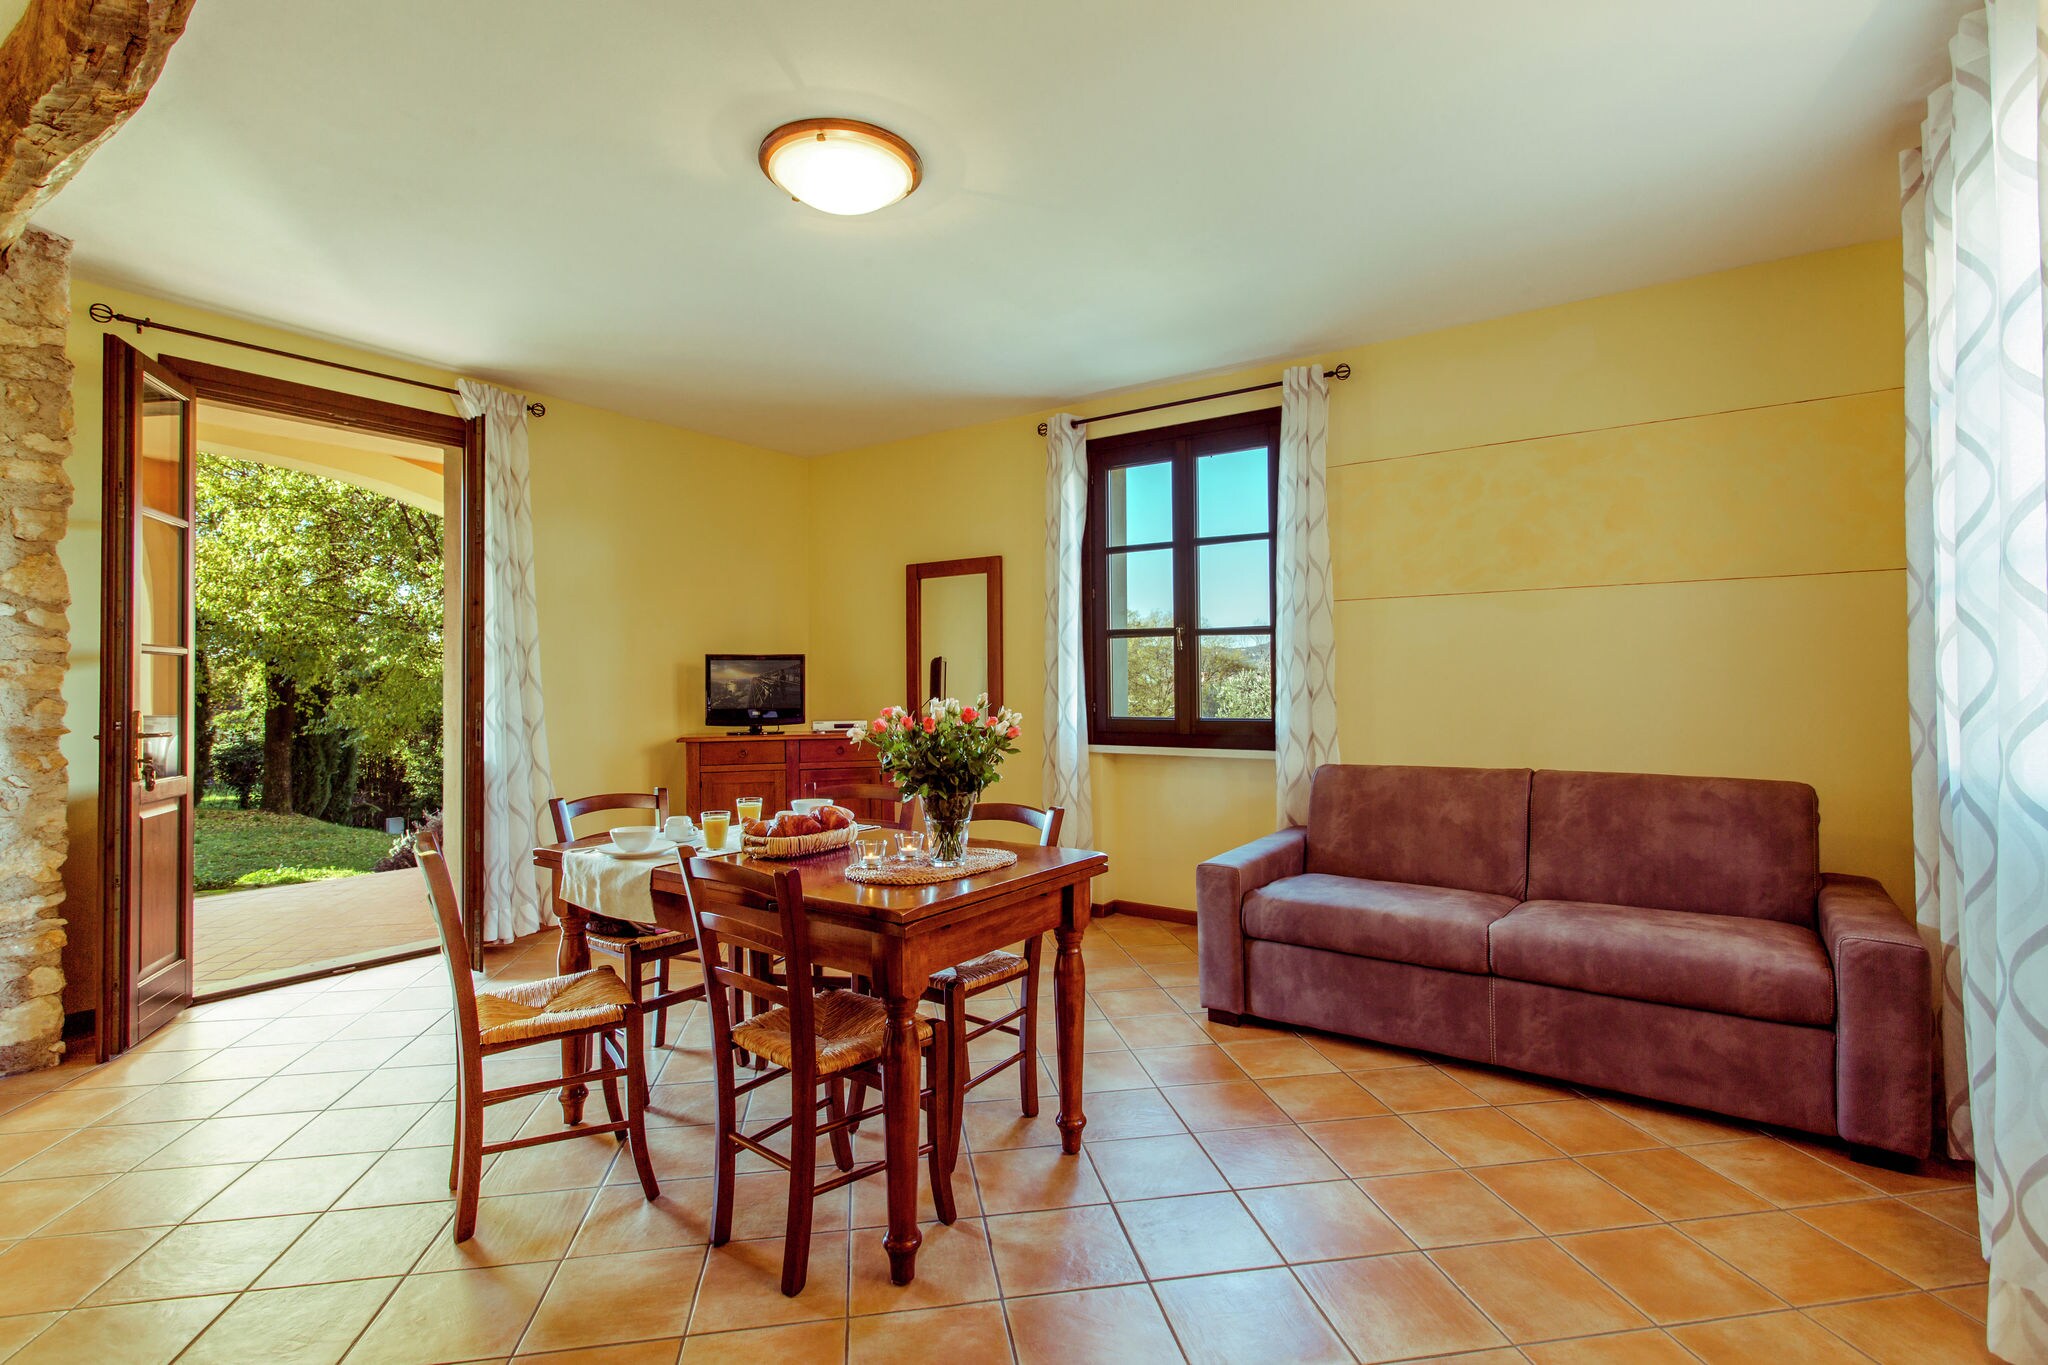 This pleasant residence is situated in Salò, close to the famous Lake Garda